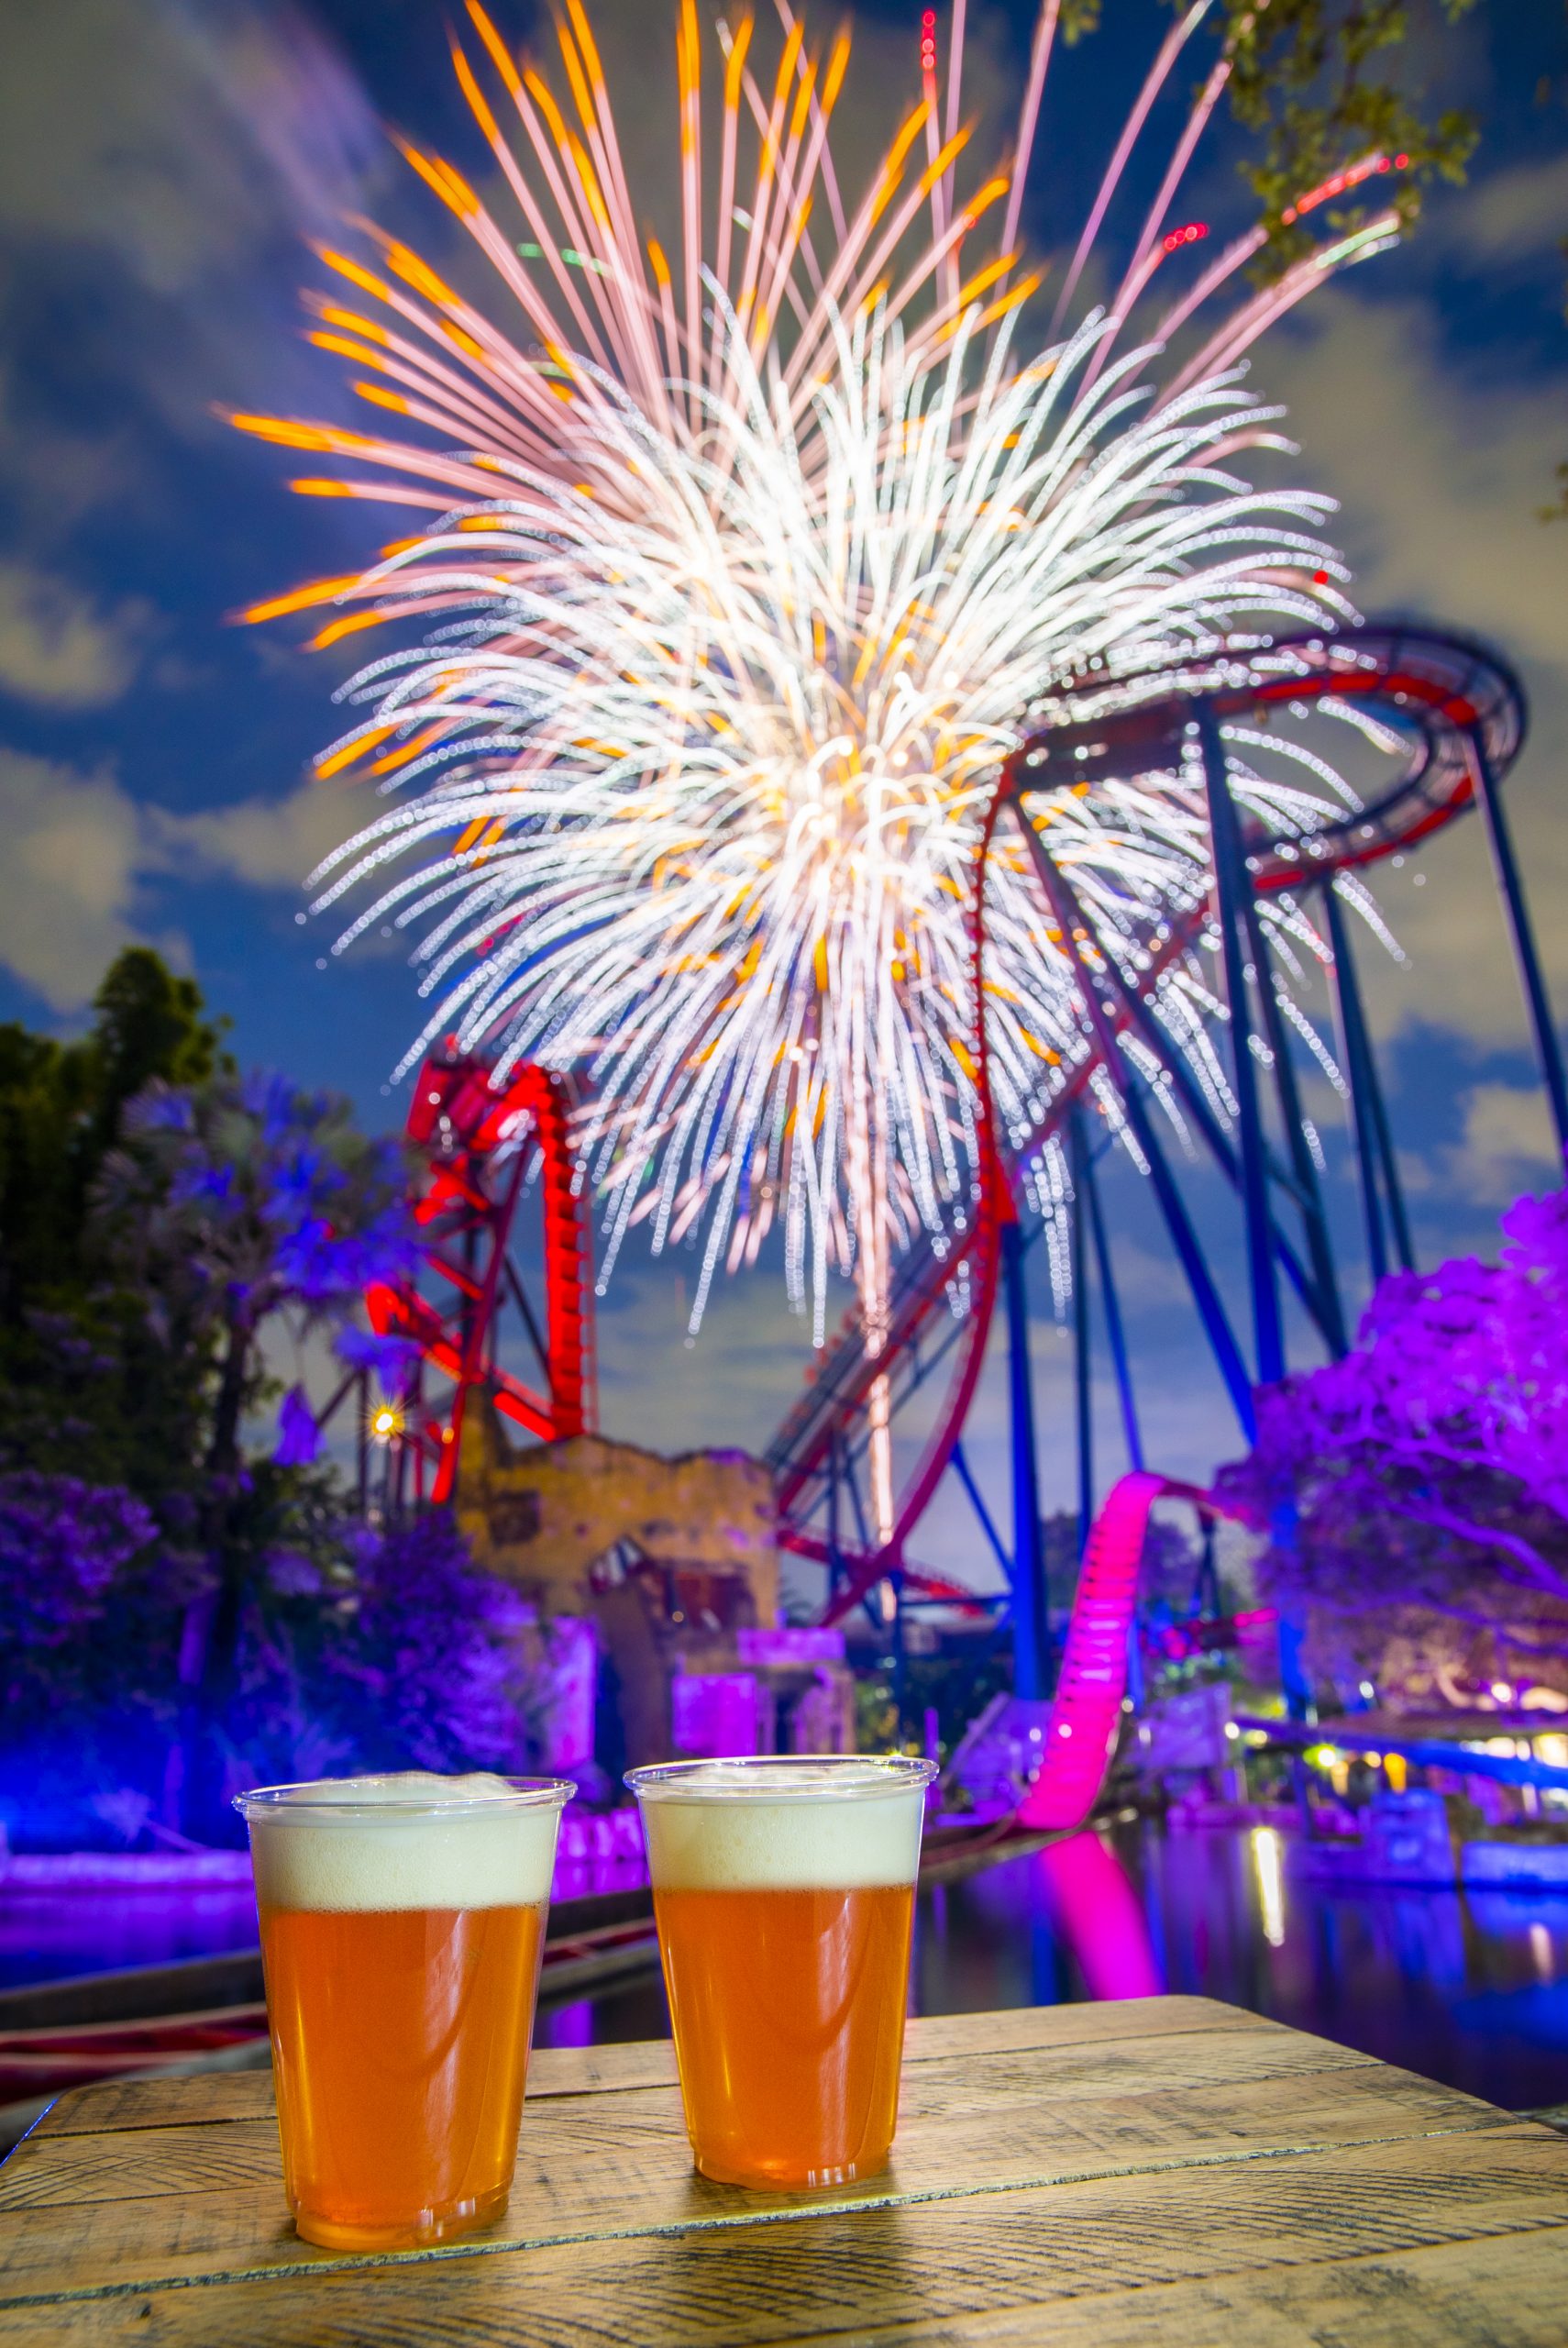 Busch Gardens Thanks its Guests this Summer with Free Beer at Busch